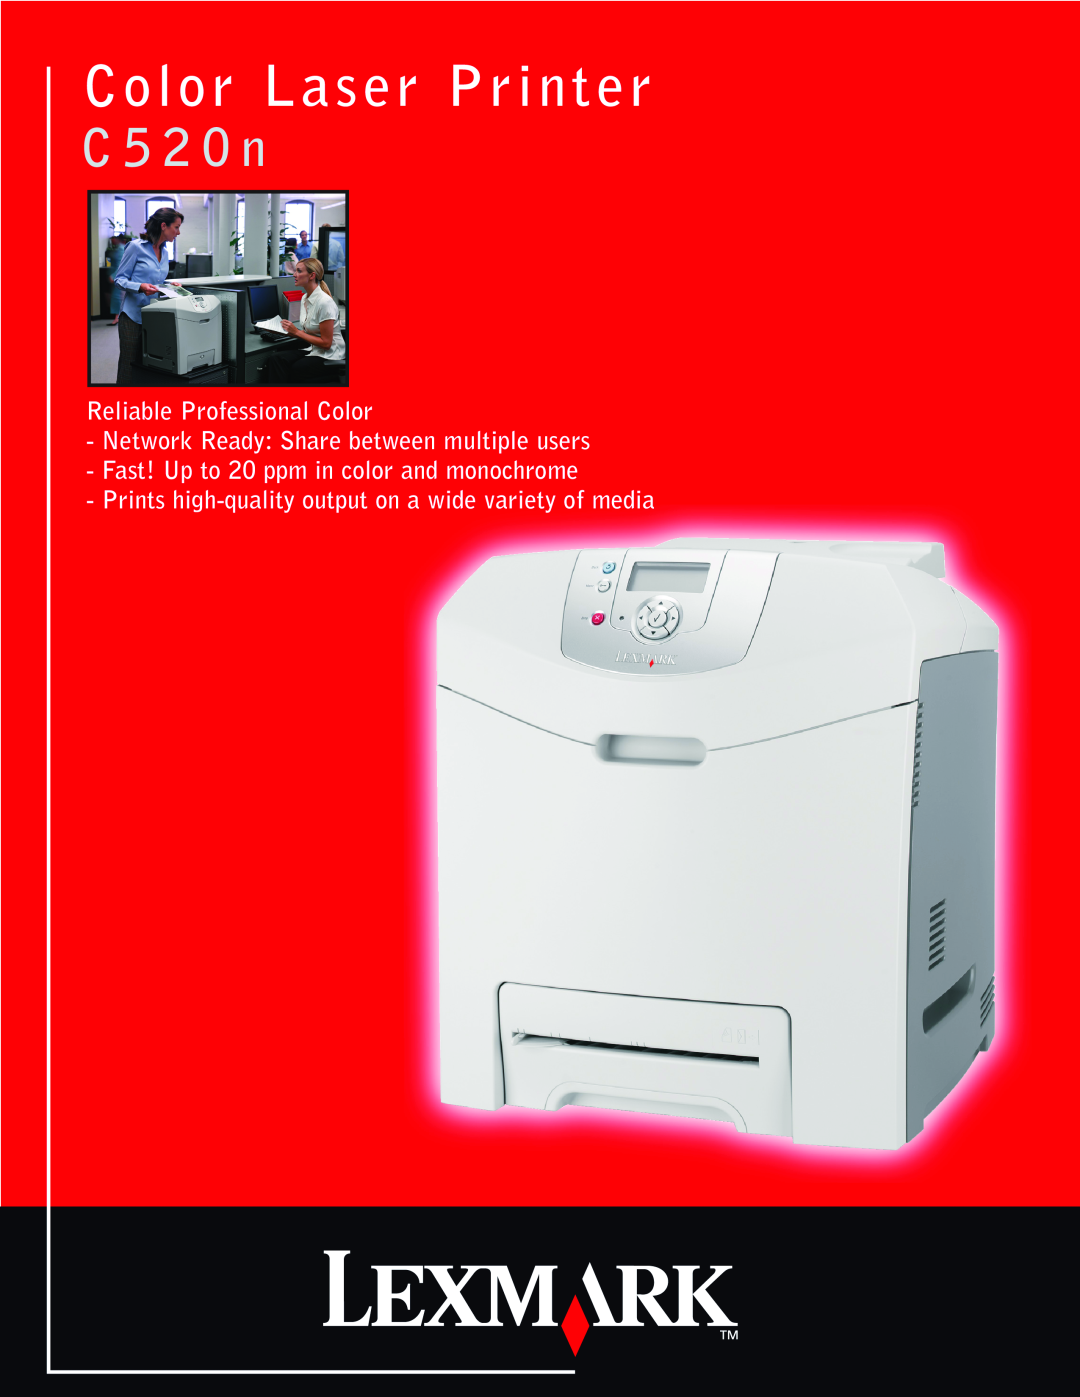 Lexmark 520n manual Reliable Professional Color, Network Ready: Share between multiple users, Color Laser Printer 